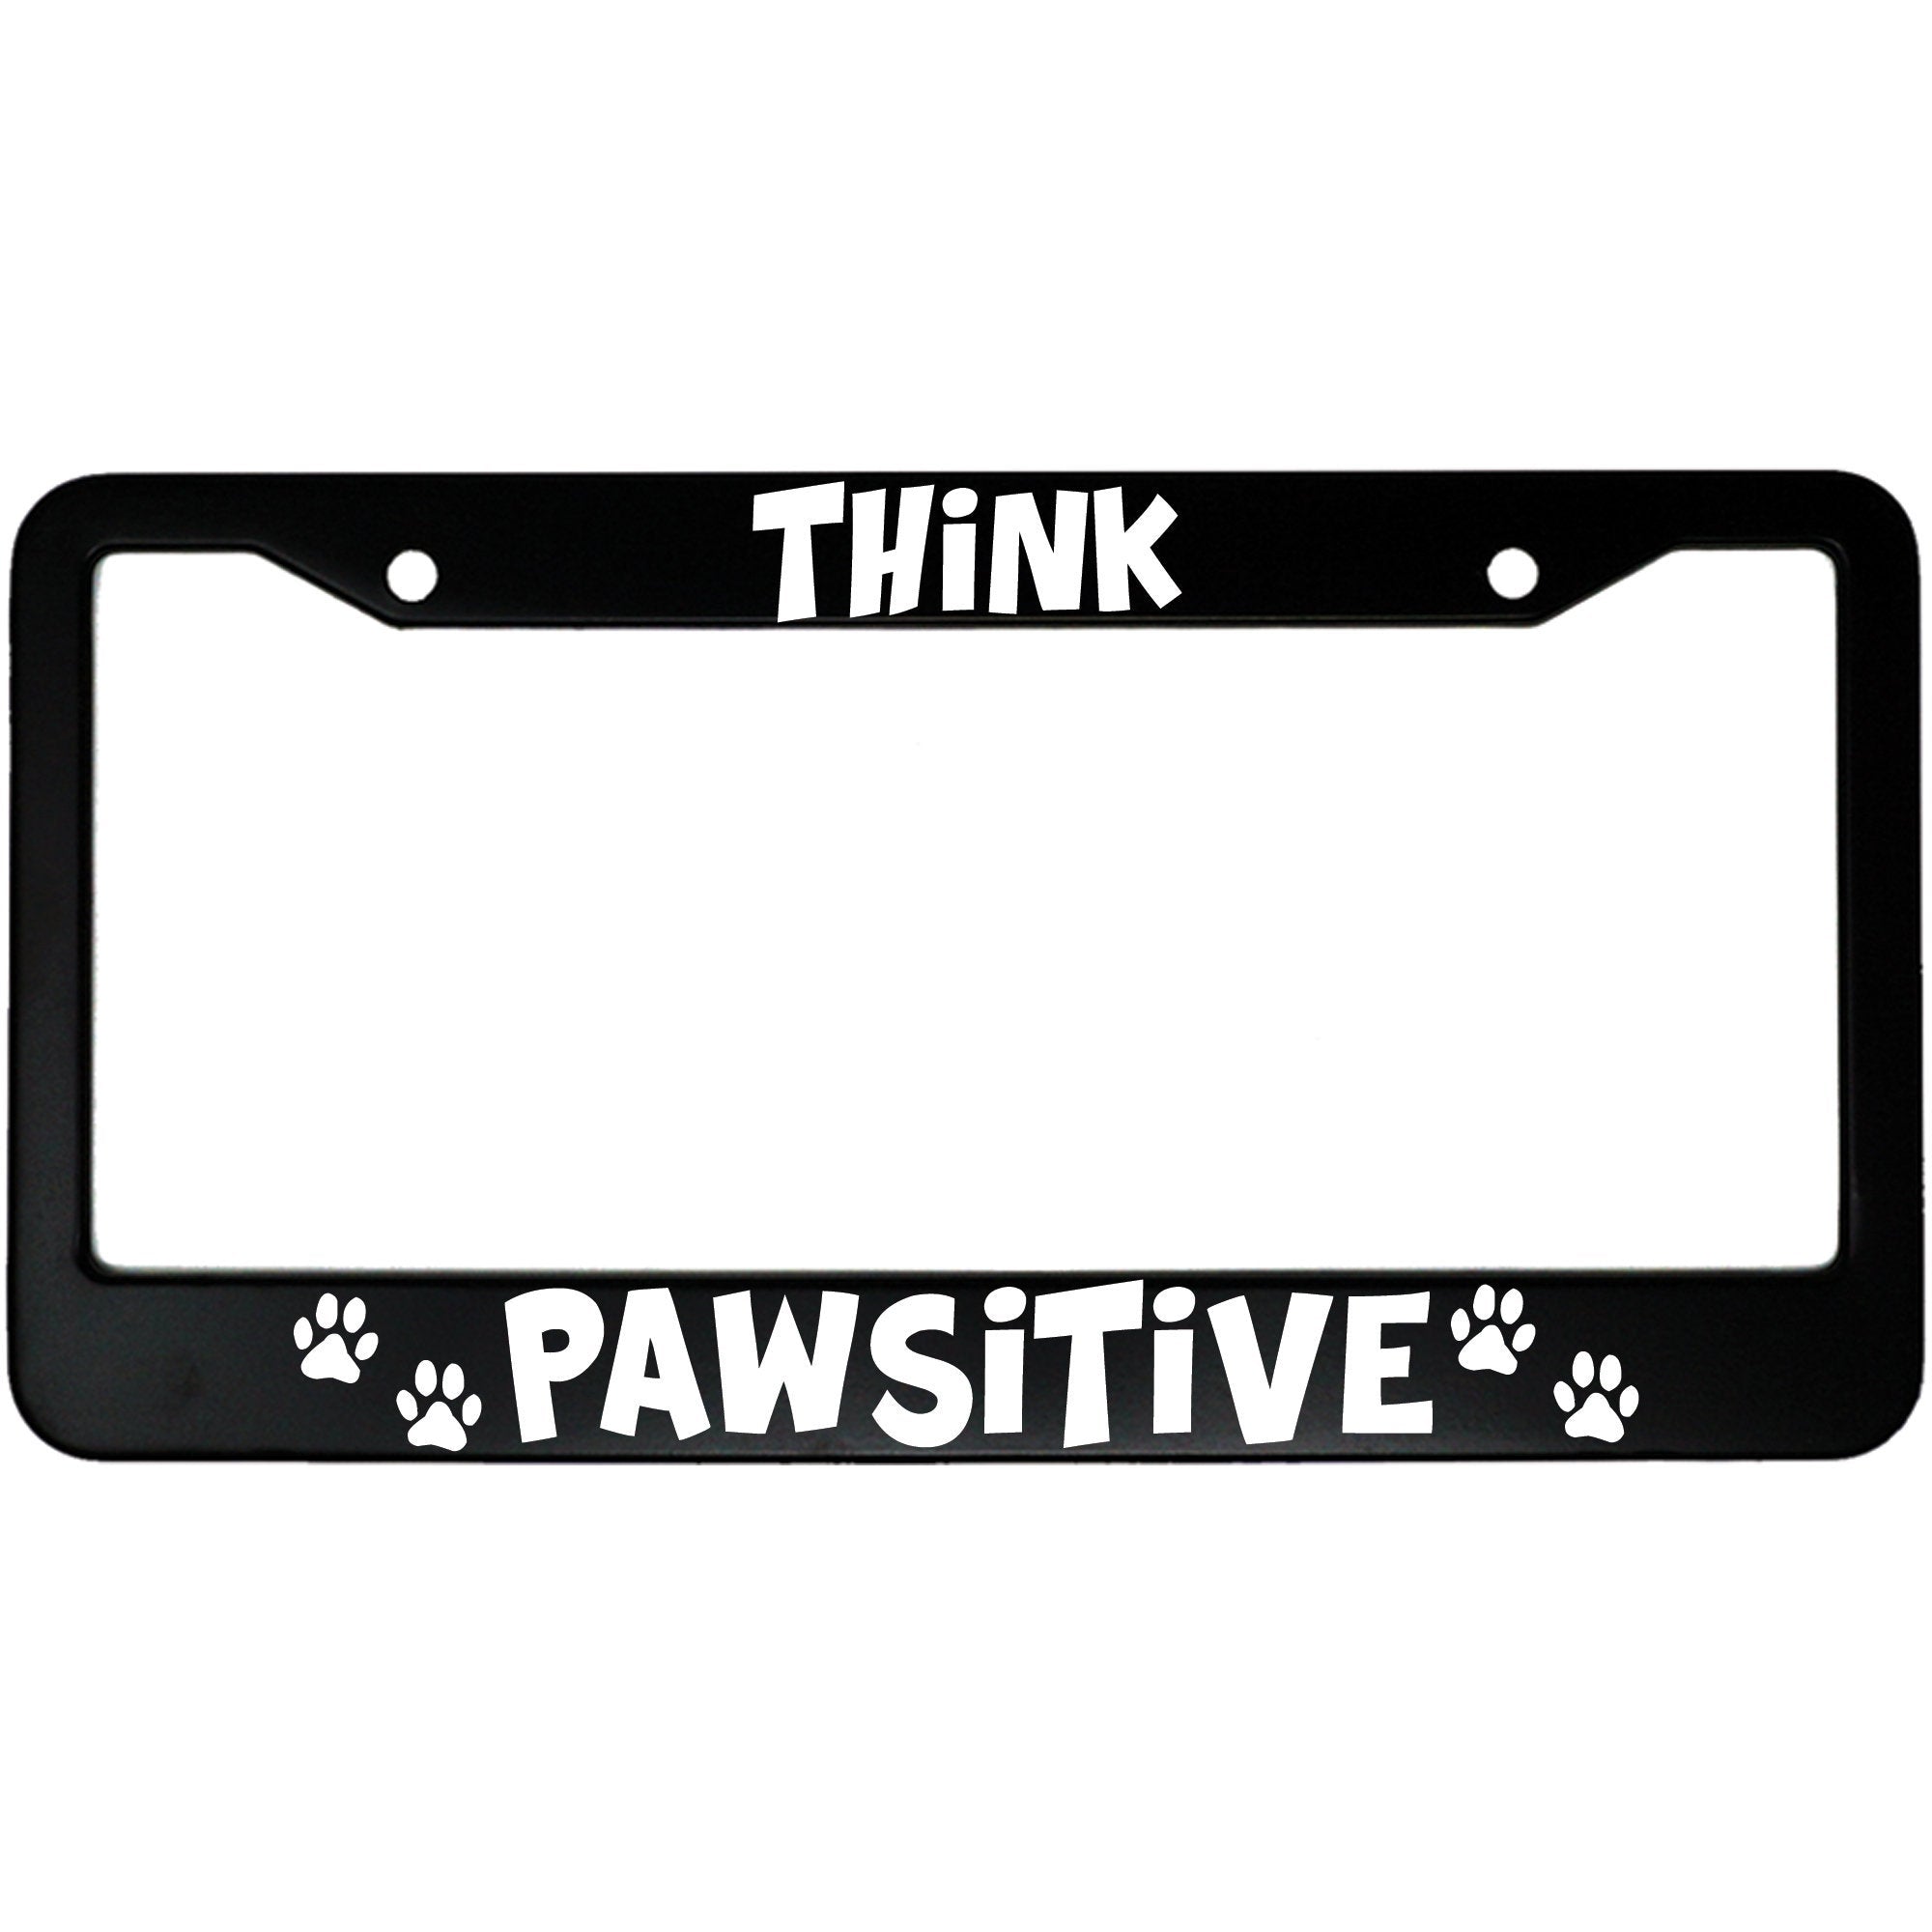 Think Pawsitive (Positive)